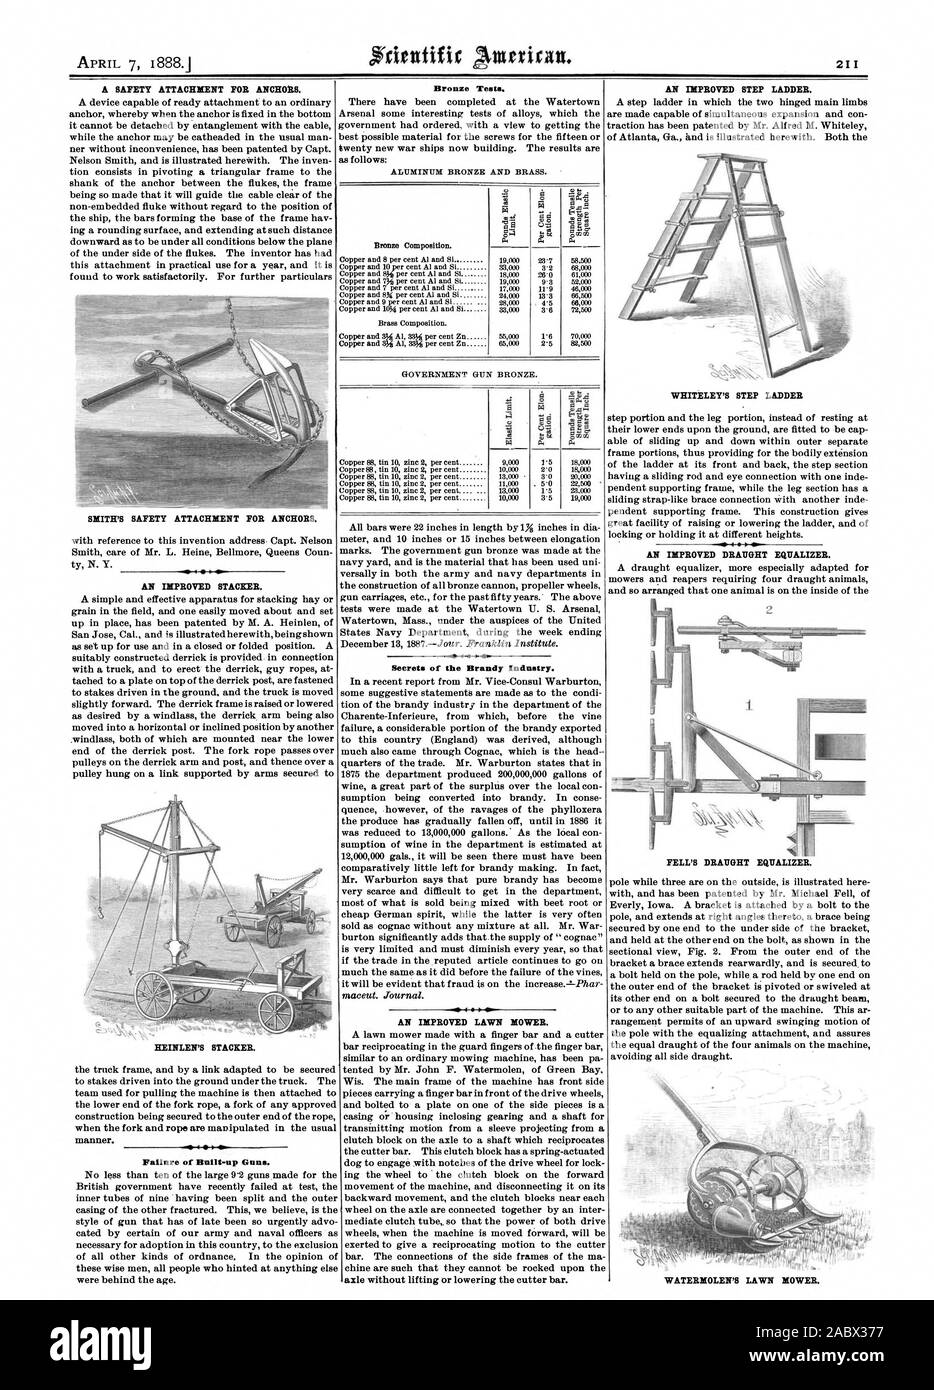 A SAFETY ATTACHMENT FOR ANCHORS. SMITH'S SAFETY ATTACHMENT FOR ANCHORS. AN IMPROVED STACKER. HEINLEN'S STACKER. 4  I 414w Failure of Built-up Guns. Bronze Tests. Secrets of the Brandy Industry. AN IMPROVED LAWN MOWER. AN IMPROVED STEP LADDER. WHITELEY'S STEP LADDER AN IMPROVED DRAUGHT EQUALIZER. FELL'S DRAUGHT EQUALIZER 'Si lir c.$ O2CE WATERBIOLEN'S LAWN ?LOWER., scientific american, 1888-04-07 Stock Photo